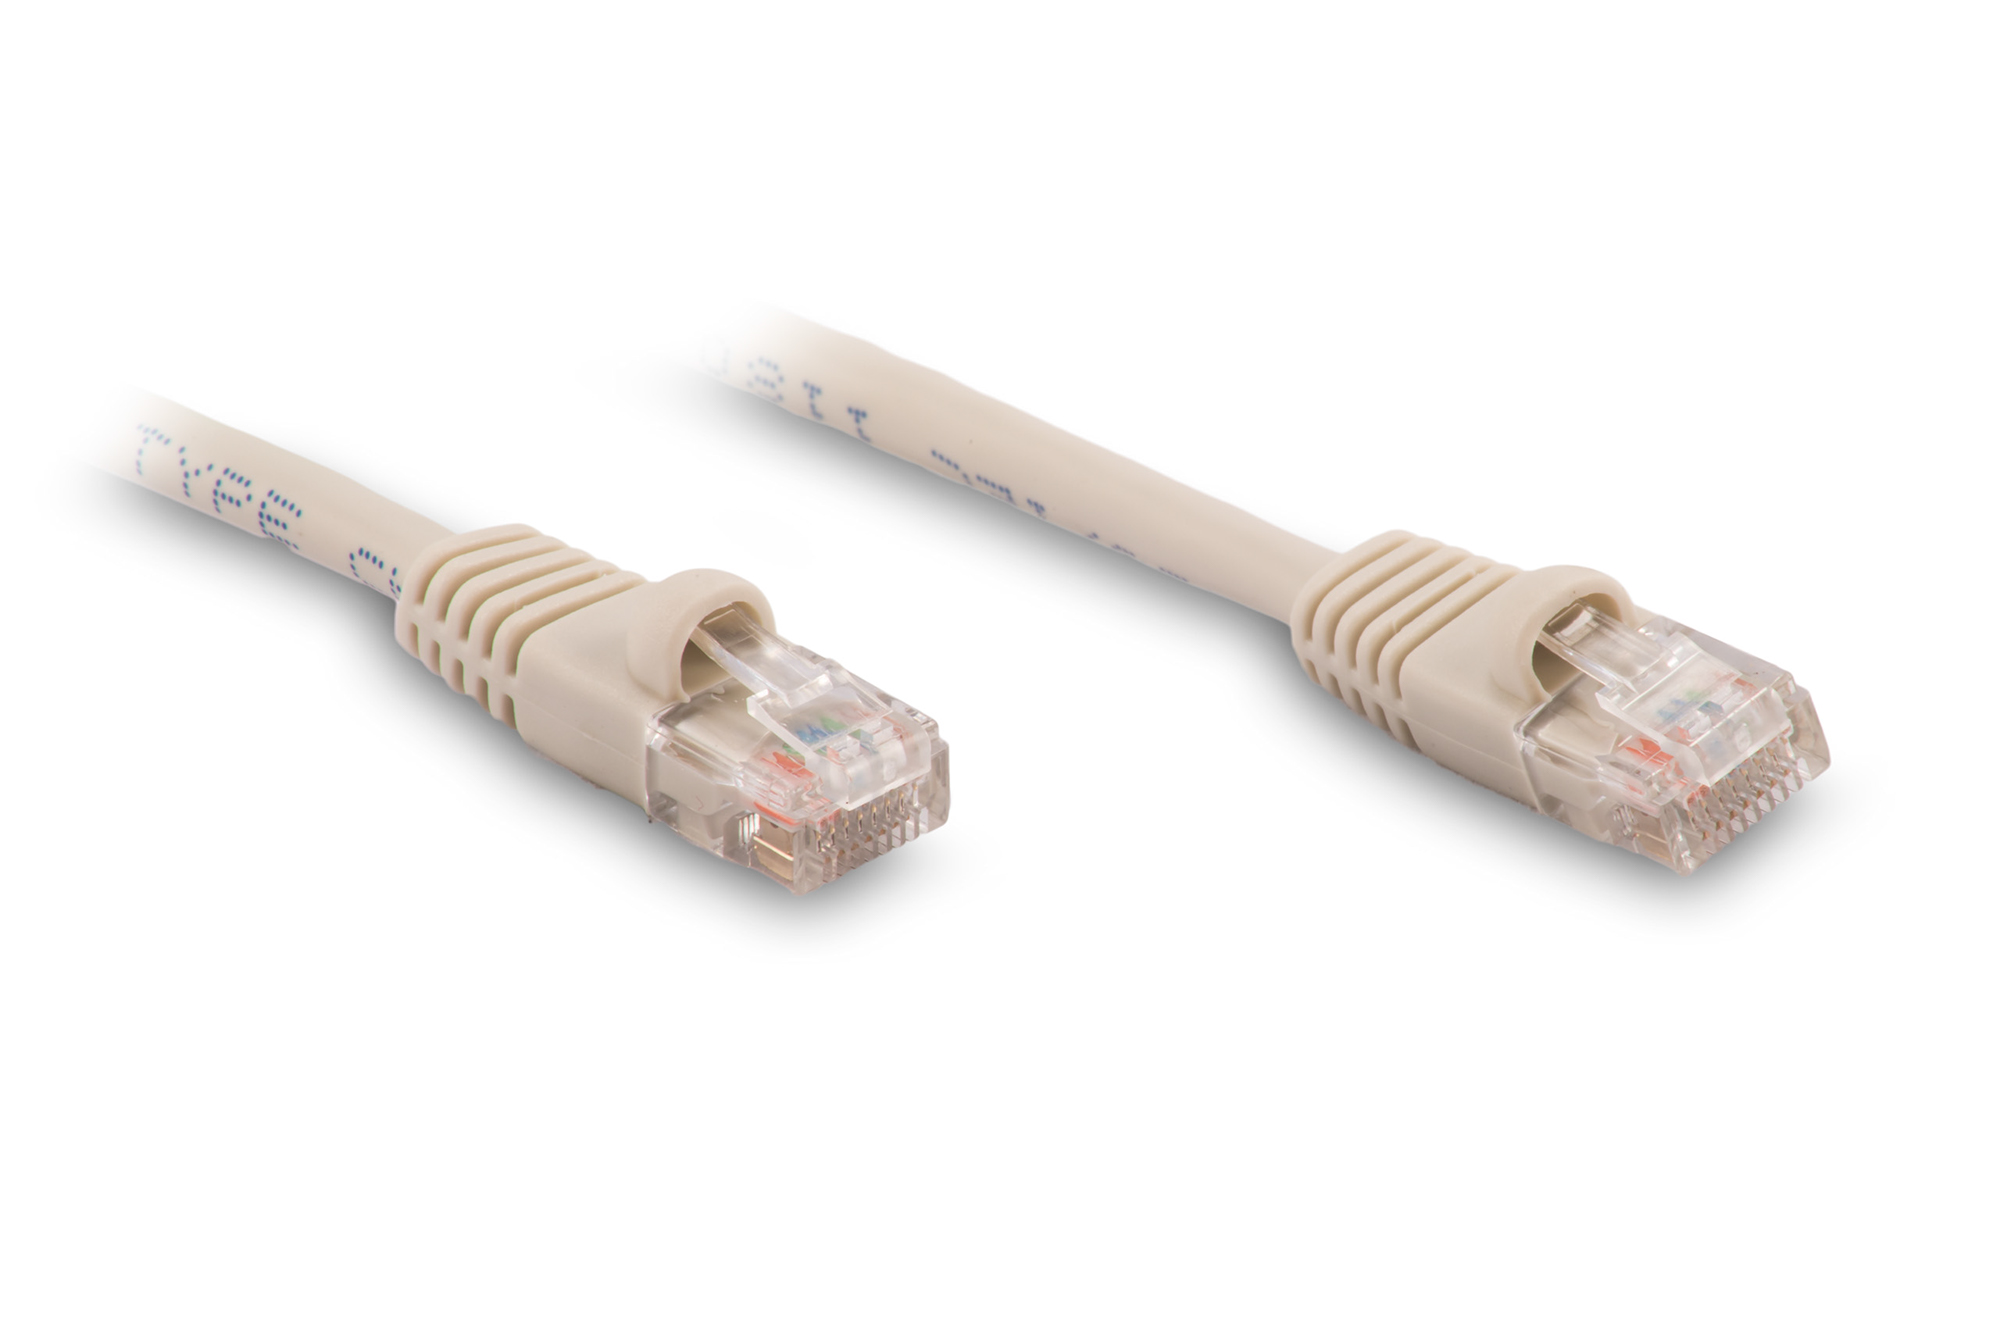 0.5ft Cat6 Ethernet Patch Cable - Gray Color - Snagless Boot